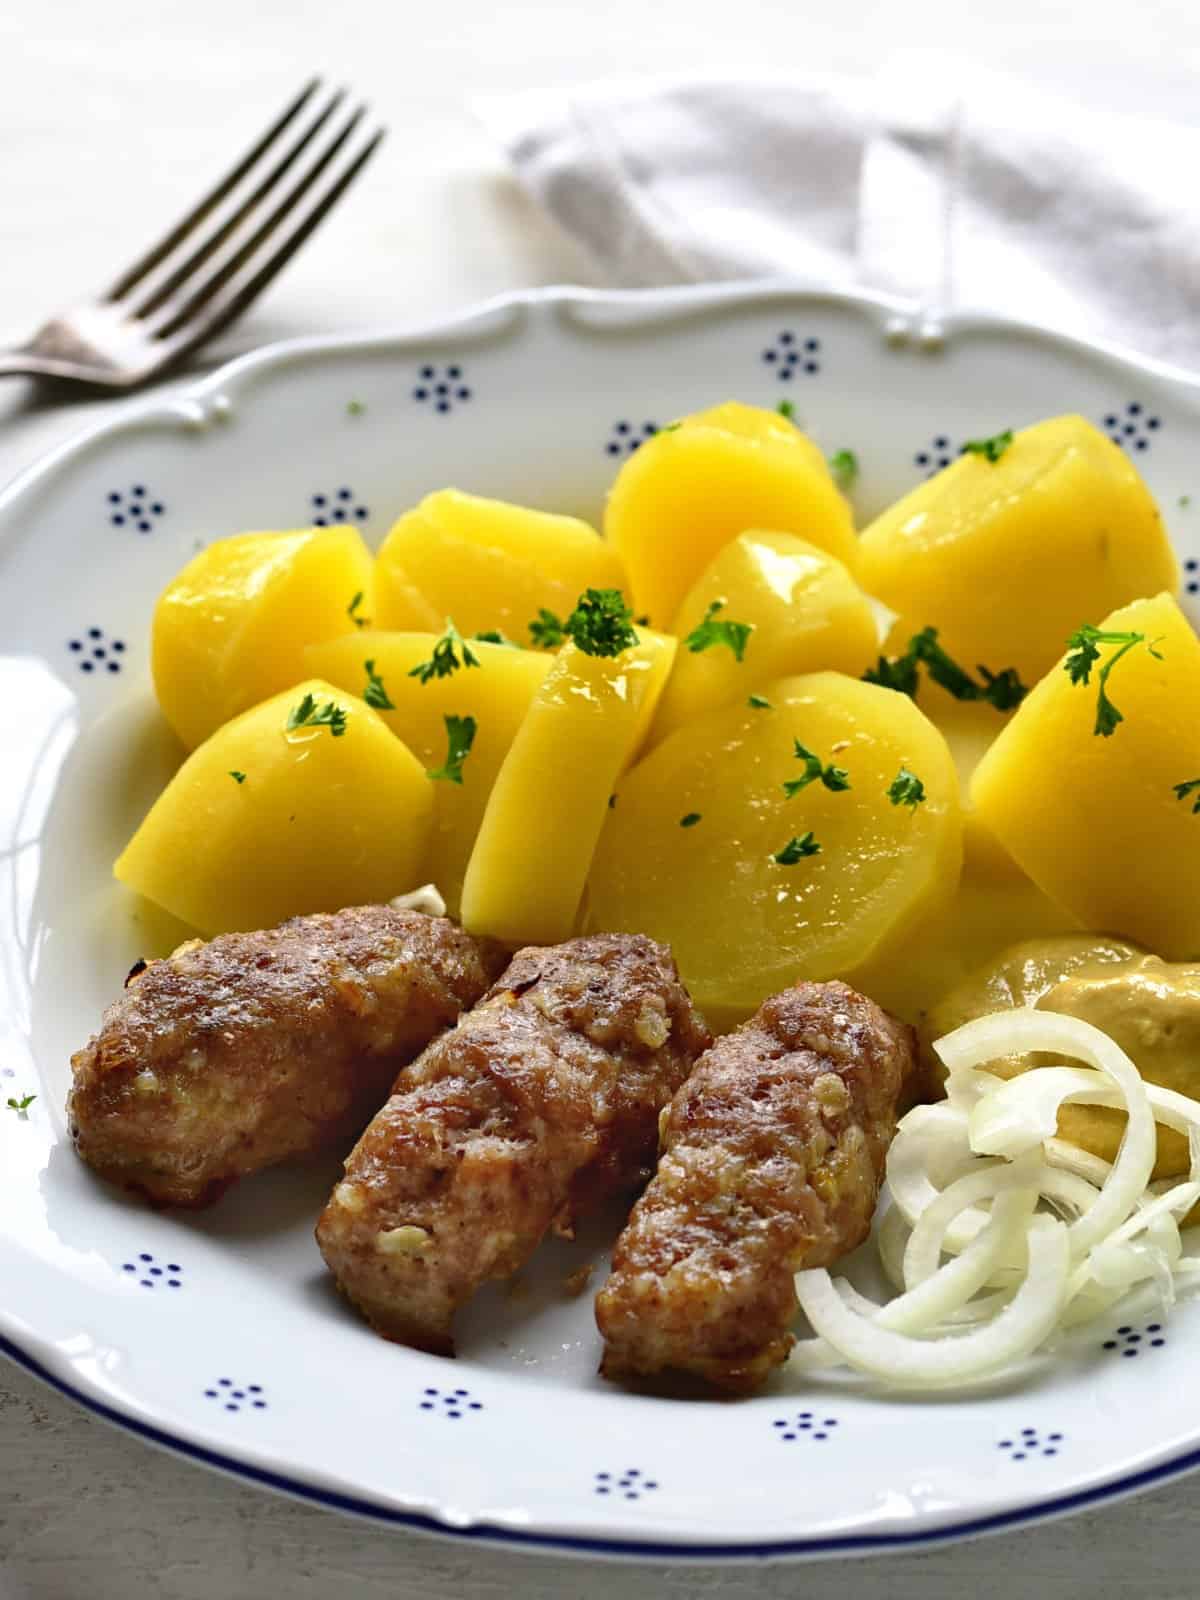 cevapcici served with boiled potatoes